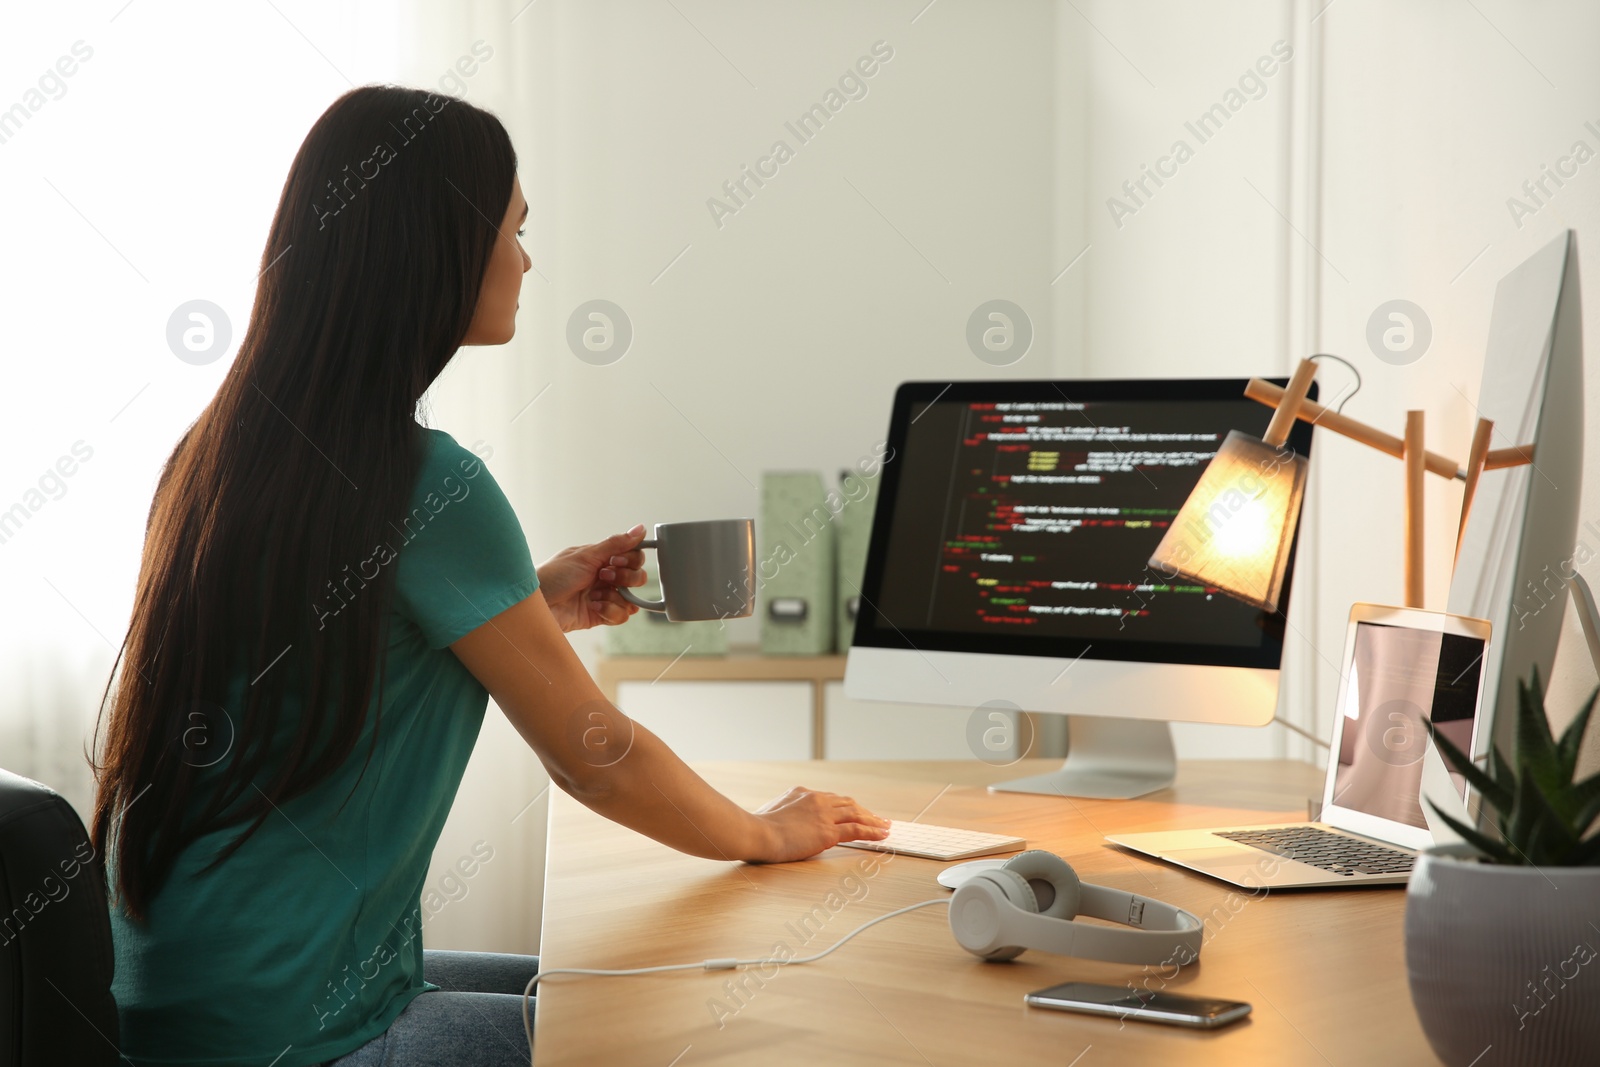 Photo of Programmer working at desk in modern office